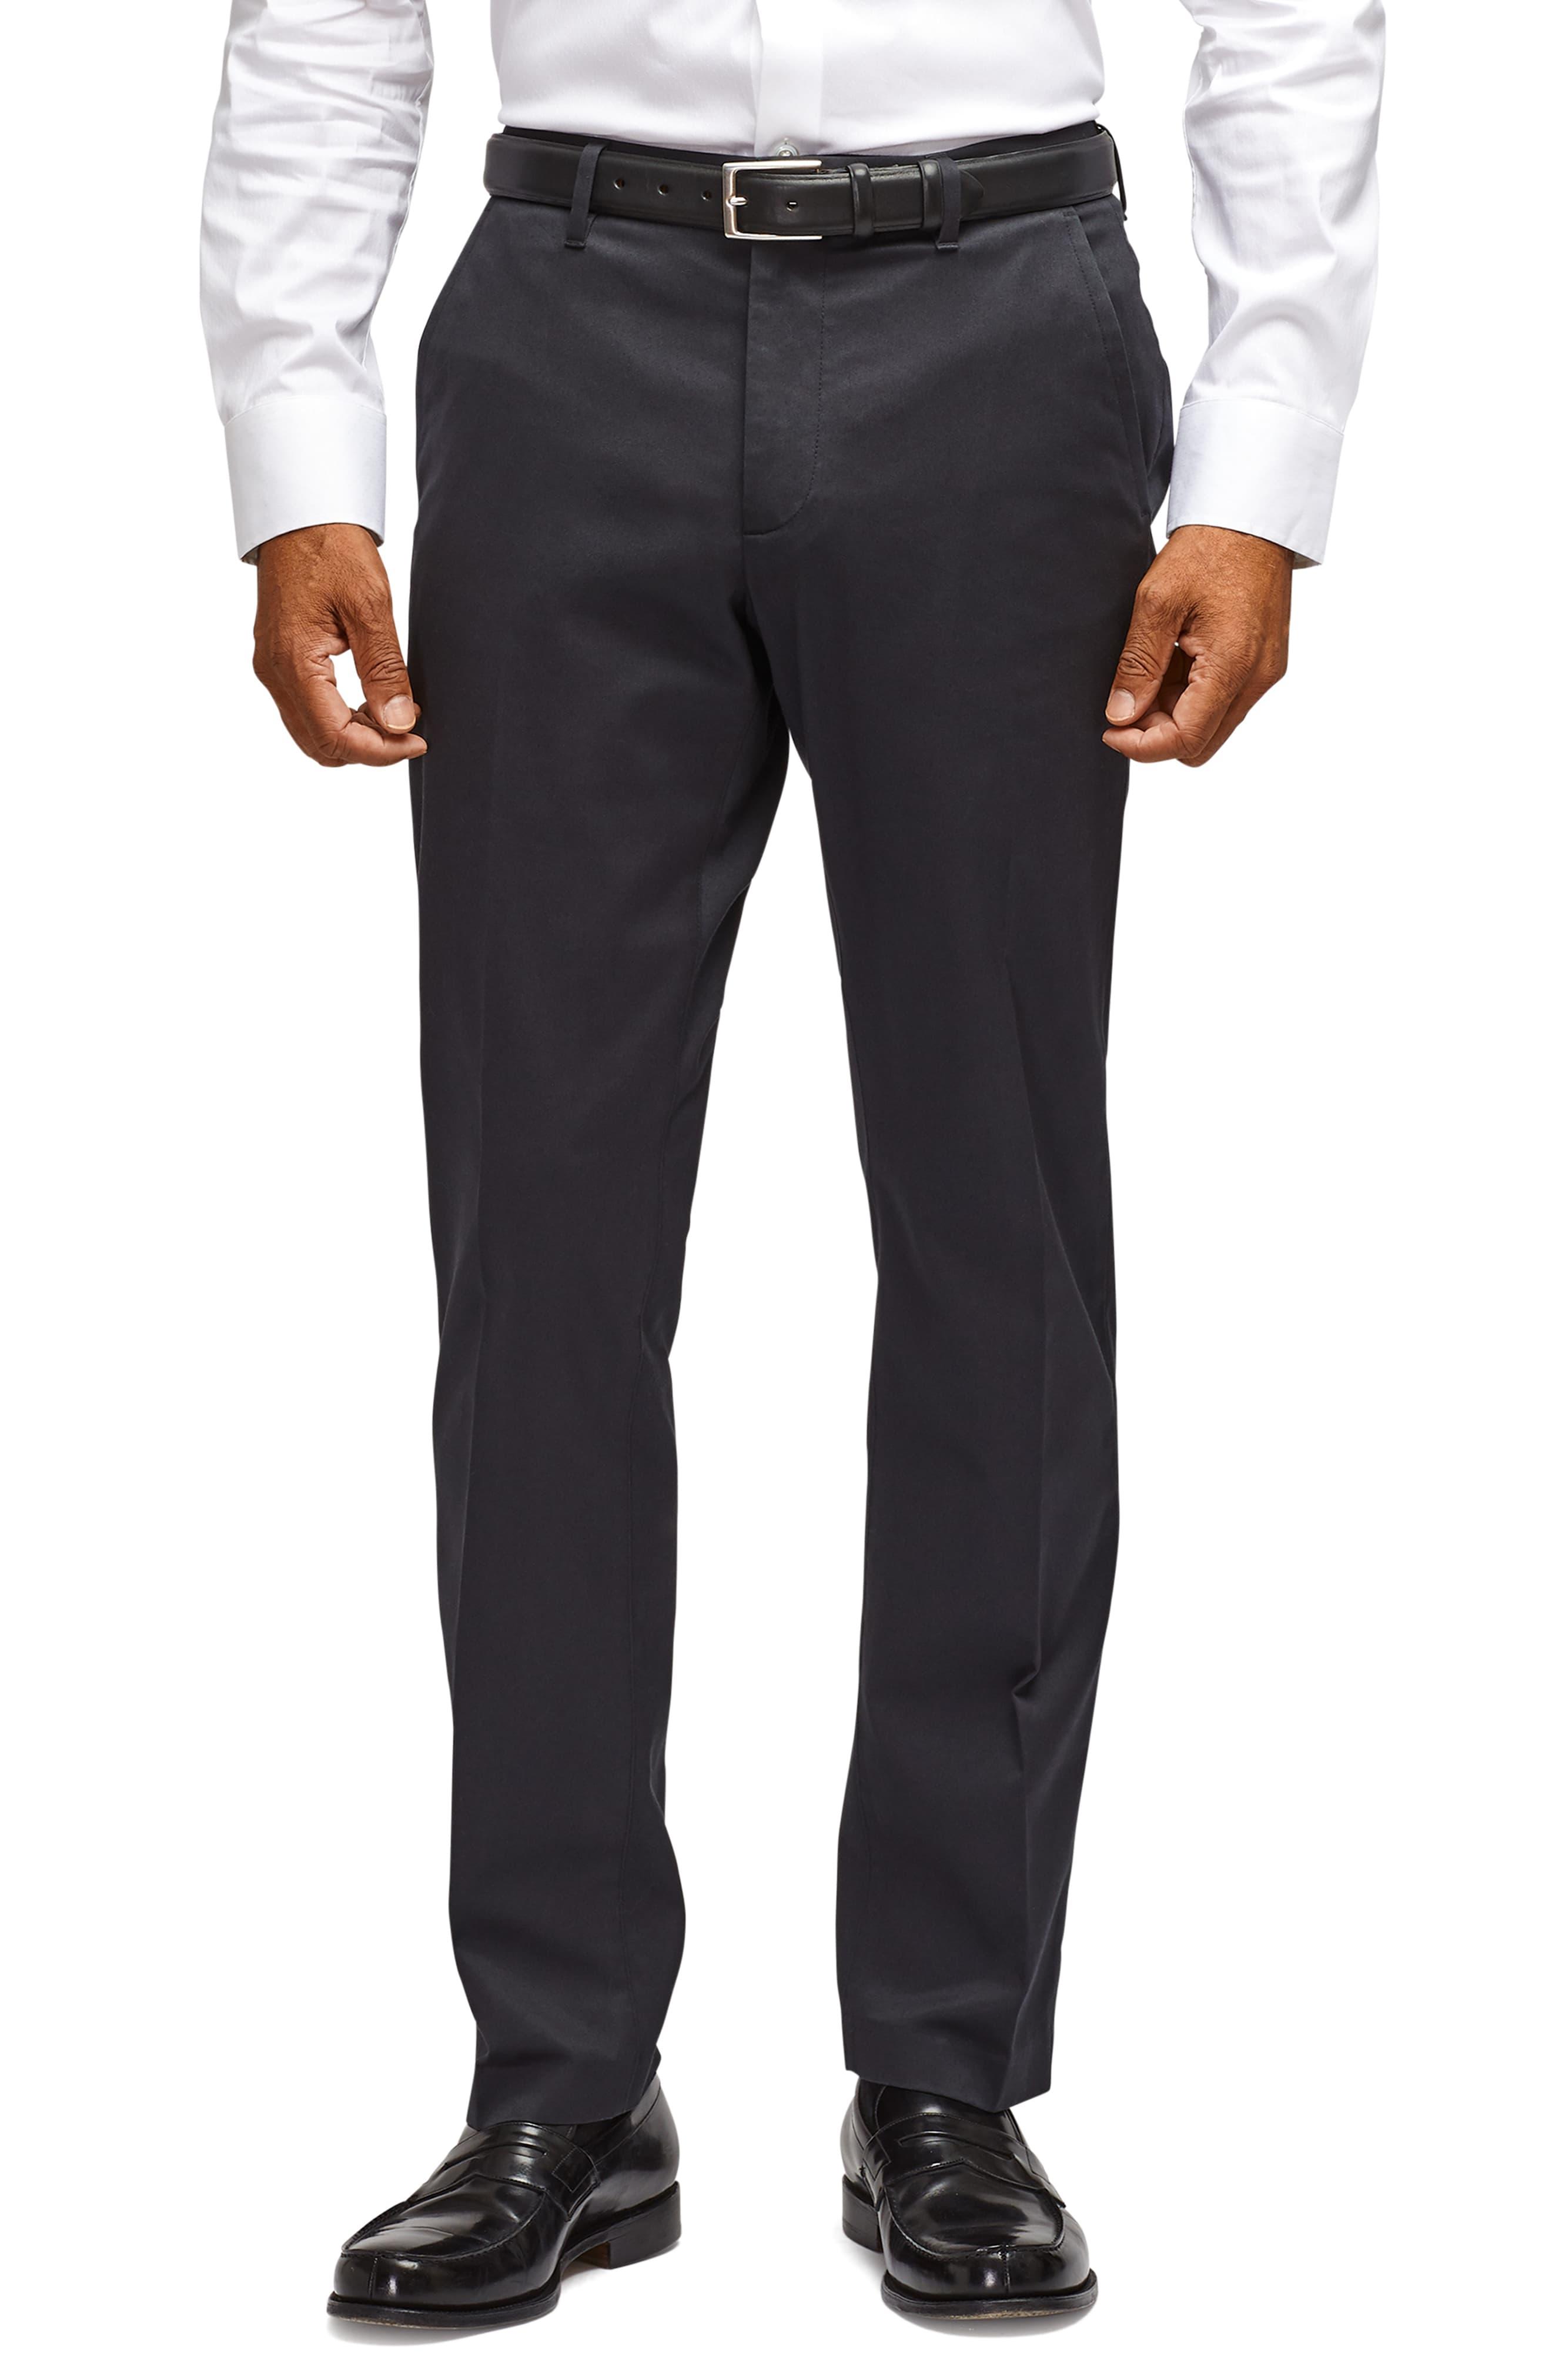 Bonobos Weekday Warrior Slim Fit Stretch Dress Pants in Gray for Men - Lyst